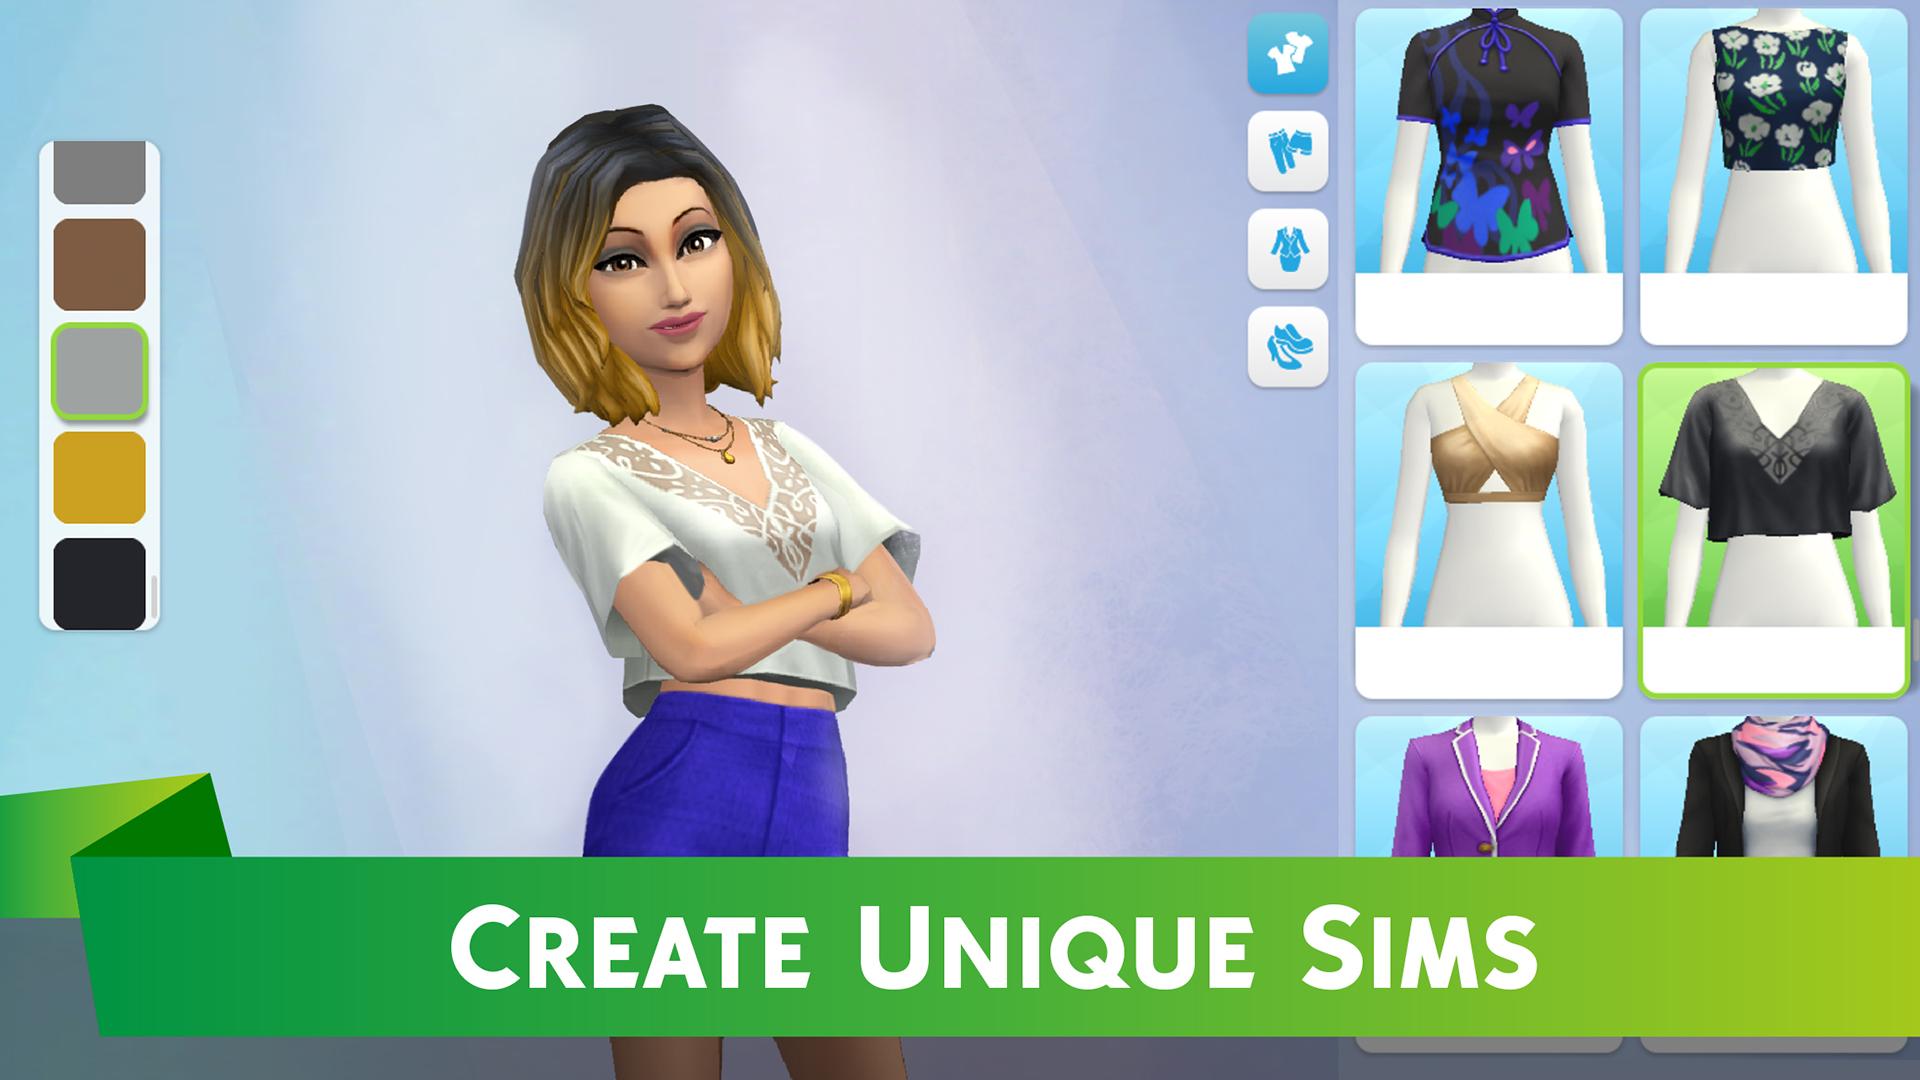 Best Guide The Sims 3 Alternatives and Similar Apps